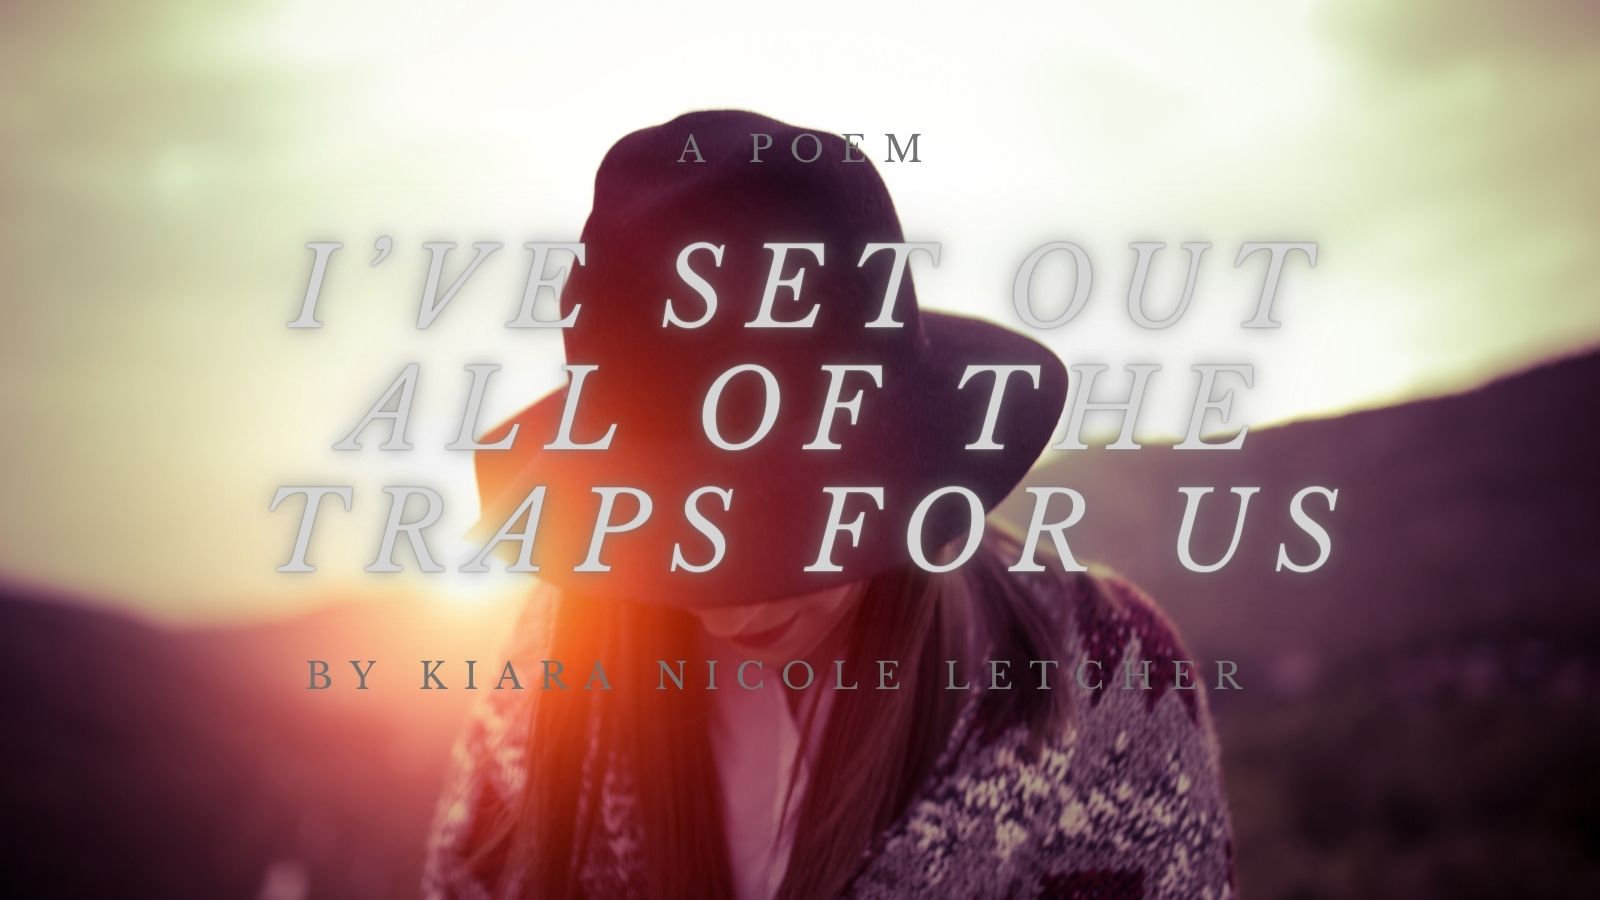 I’ve Set Out All of the Traps for Us by Kiara Nicole Letcher